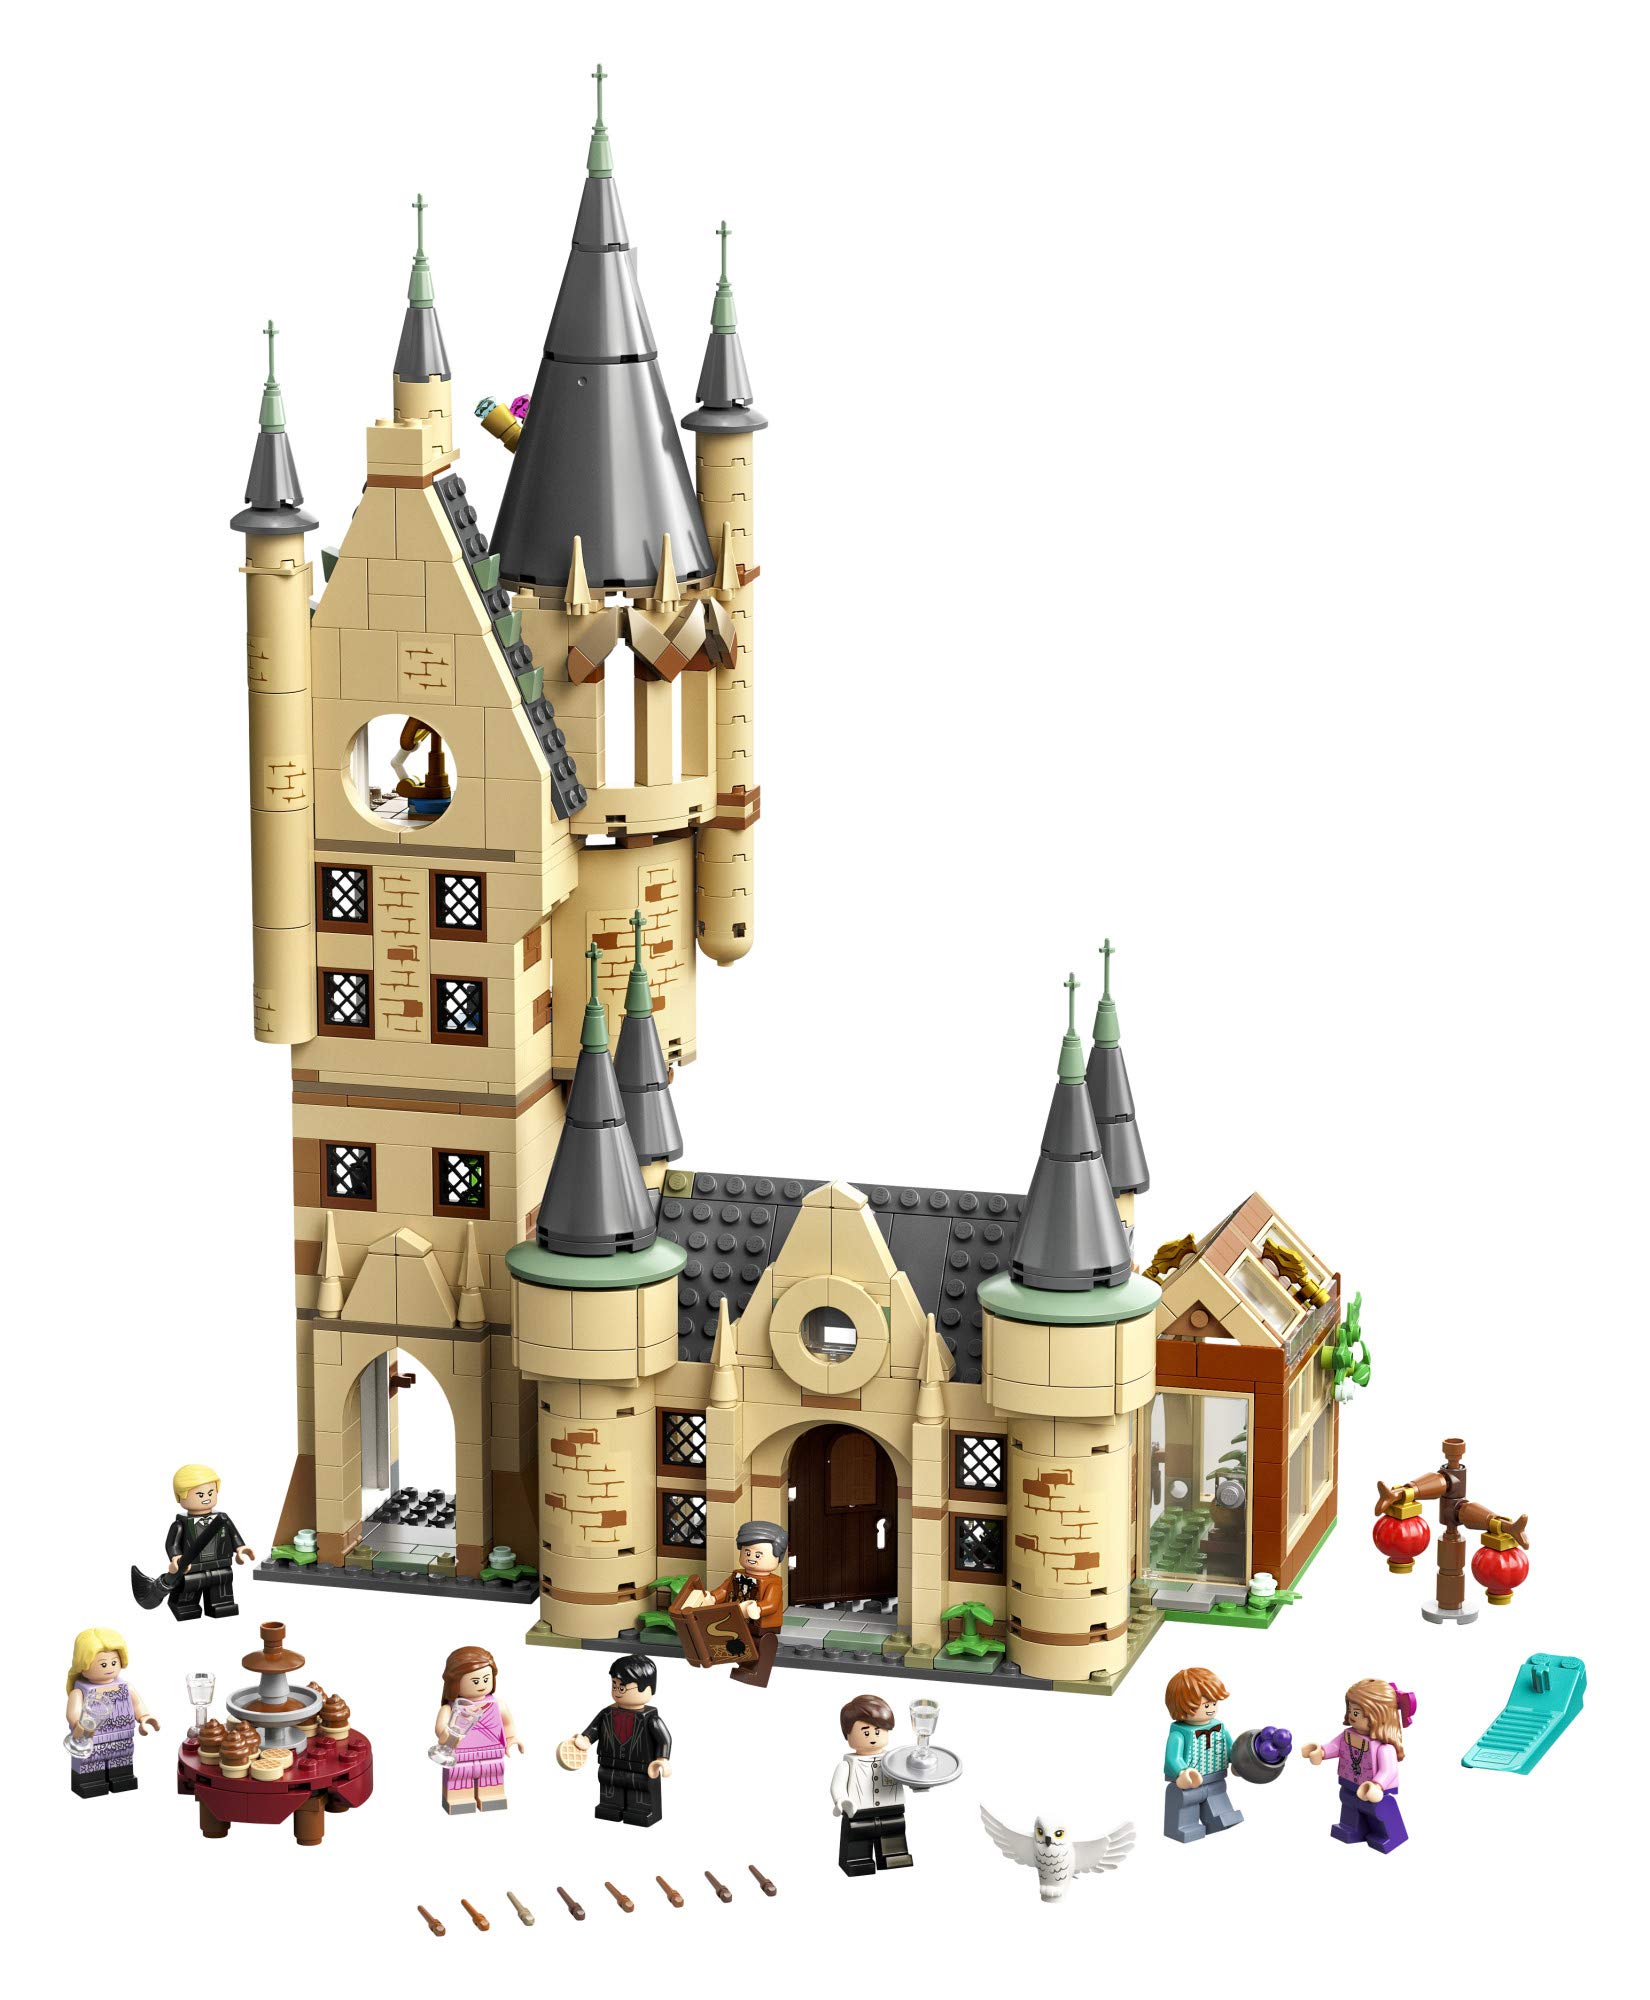 LEGO Harry Potter Hogwarts Astronomy Tower 75969, Castle Toy Playset with 8 Character Minifigures Including Harry Potter and Draco Malfoy, Wizarding World, Birthday Gifts for Kids, Girls & Boys